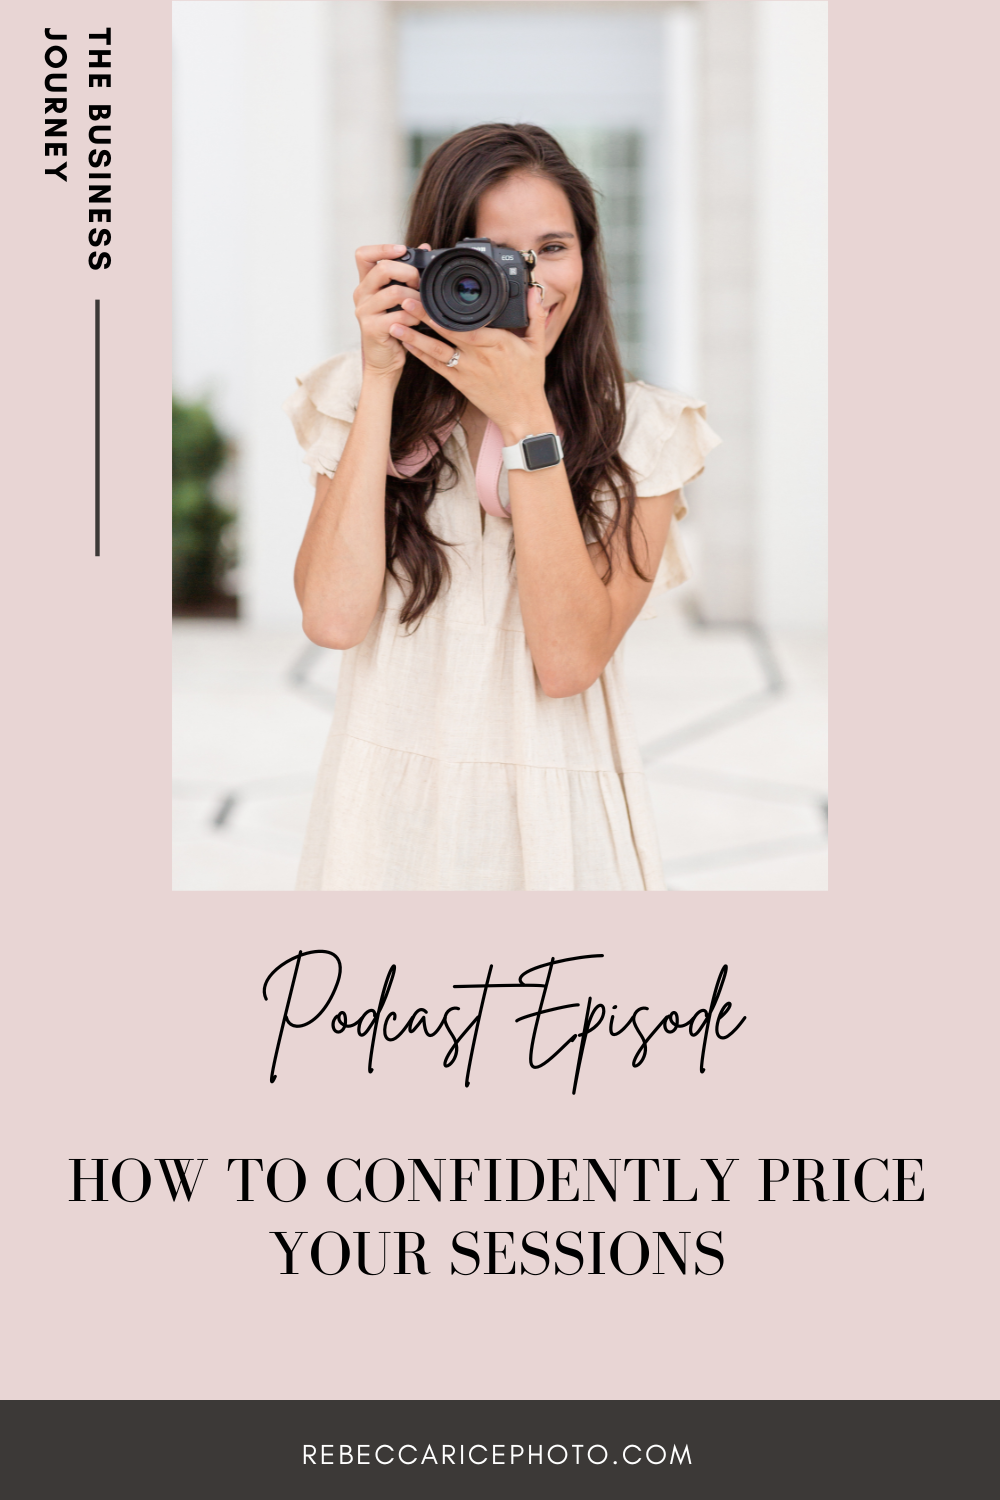 Ep 94 - How to Confidently Price Your Sessions - photography pricing tips